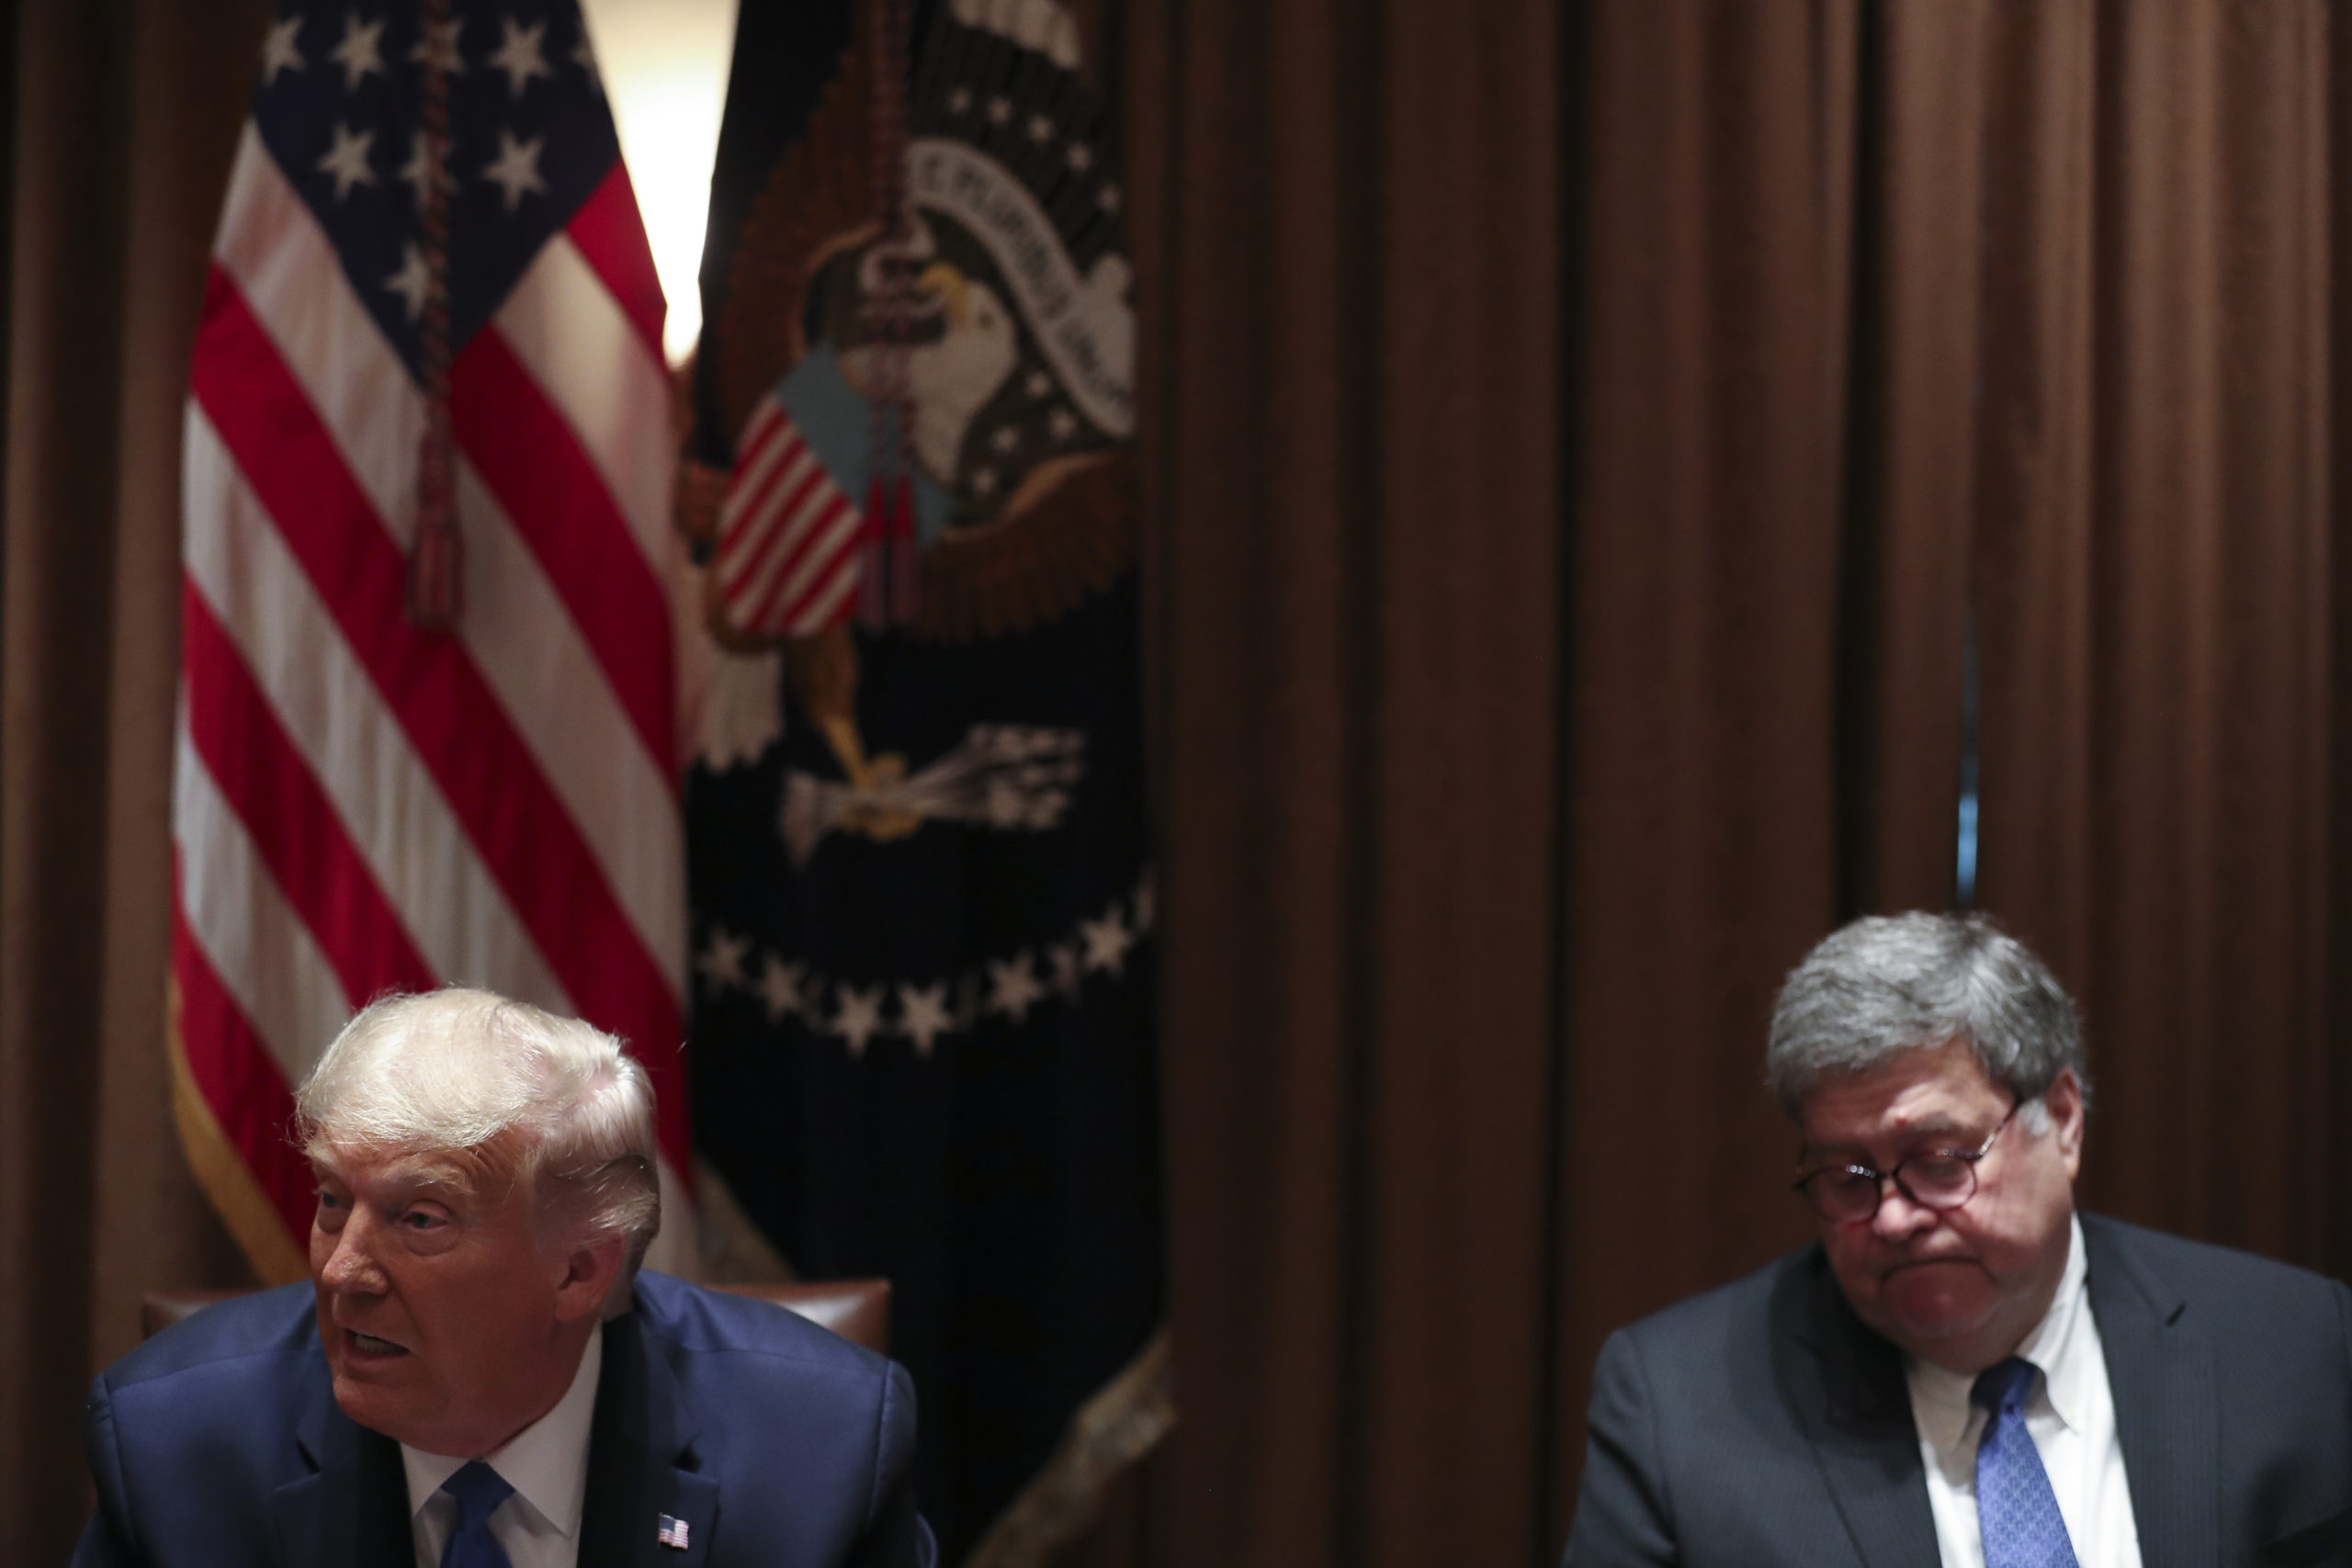 WASHINGTON, DC - SEPTEMBER 23: U.S. President Donald Trump speaks as U.S. Attorney General William Barr listens during a discussion with State Attorneys General on Protecting Consumers from Social Media Abuses in the Cabinet Room of the White House on September 23, 2020 in Washington, DC. (Photo by Oliver Contreras-Pool/Getty Images)